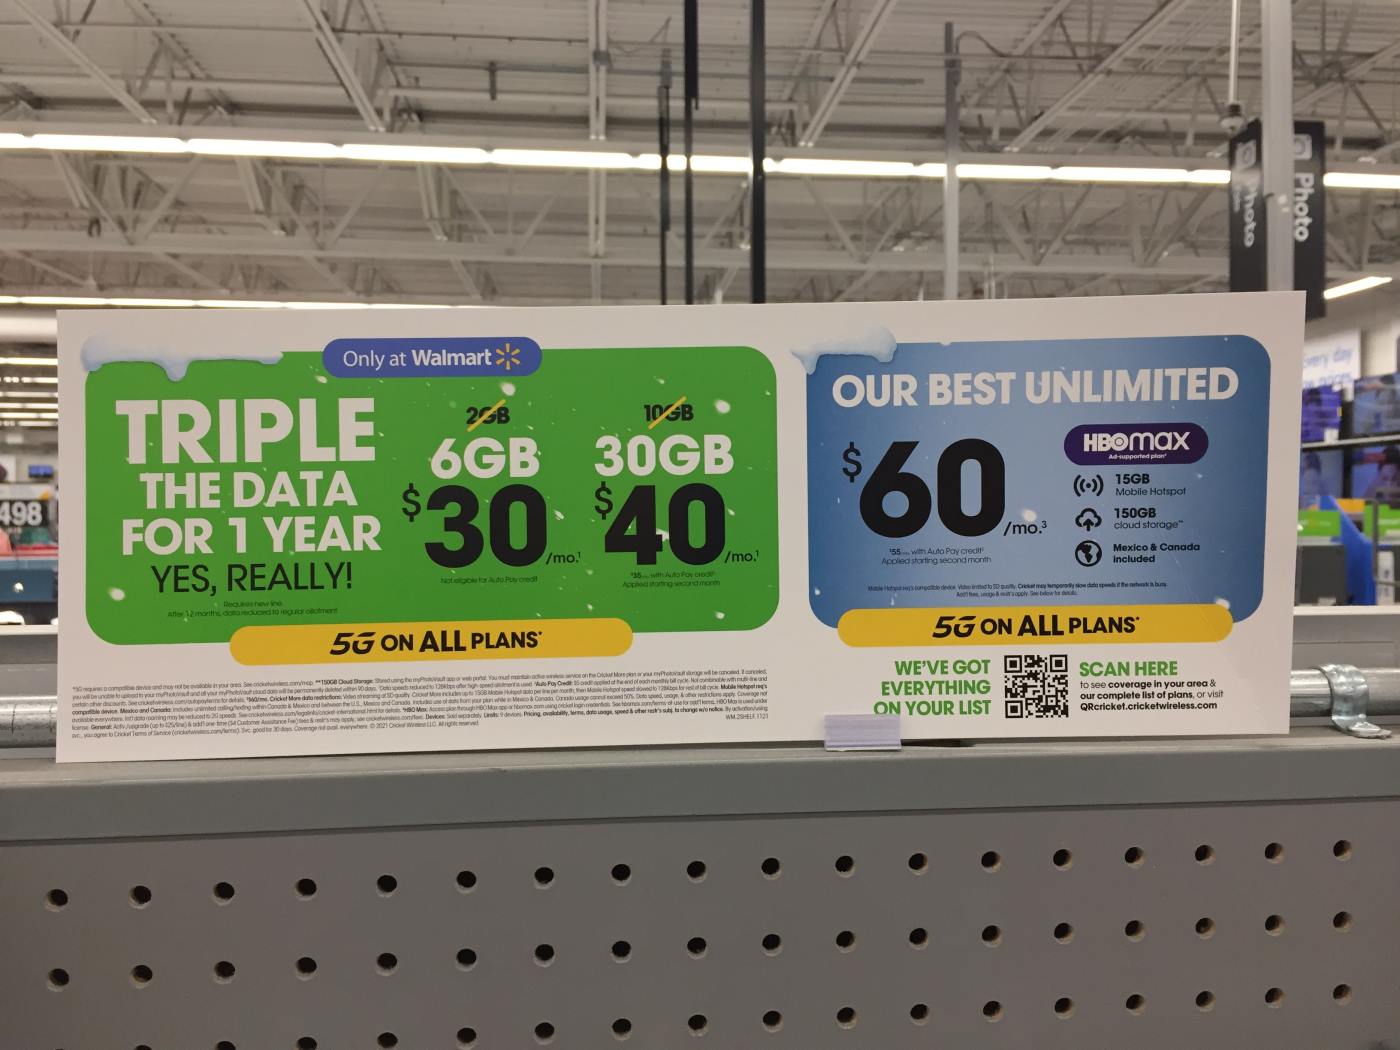 Cricket Wireless Triple Data Offer Observed On Display At A Walmart By Wave7 Research